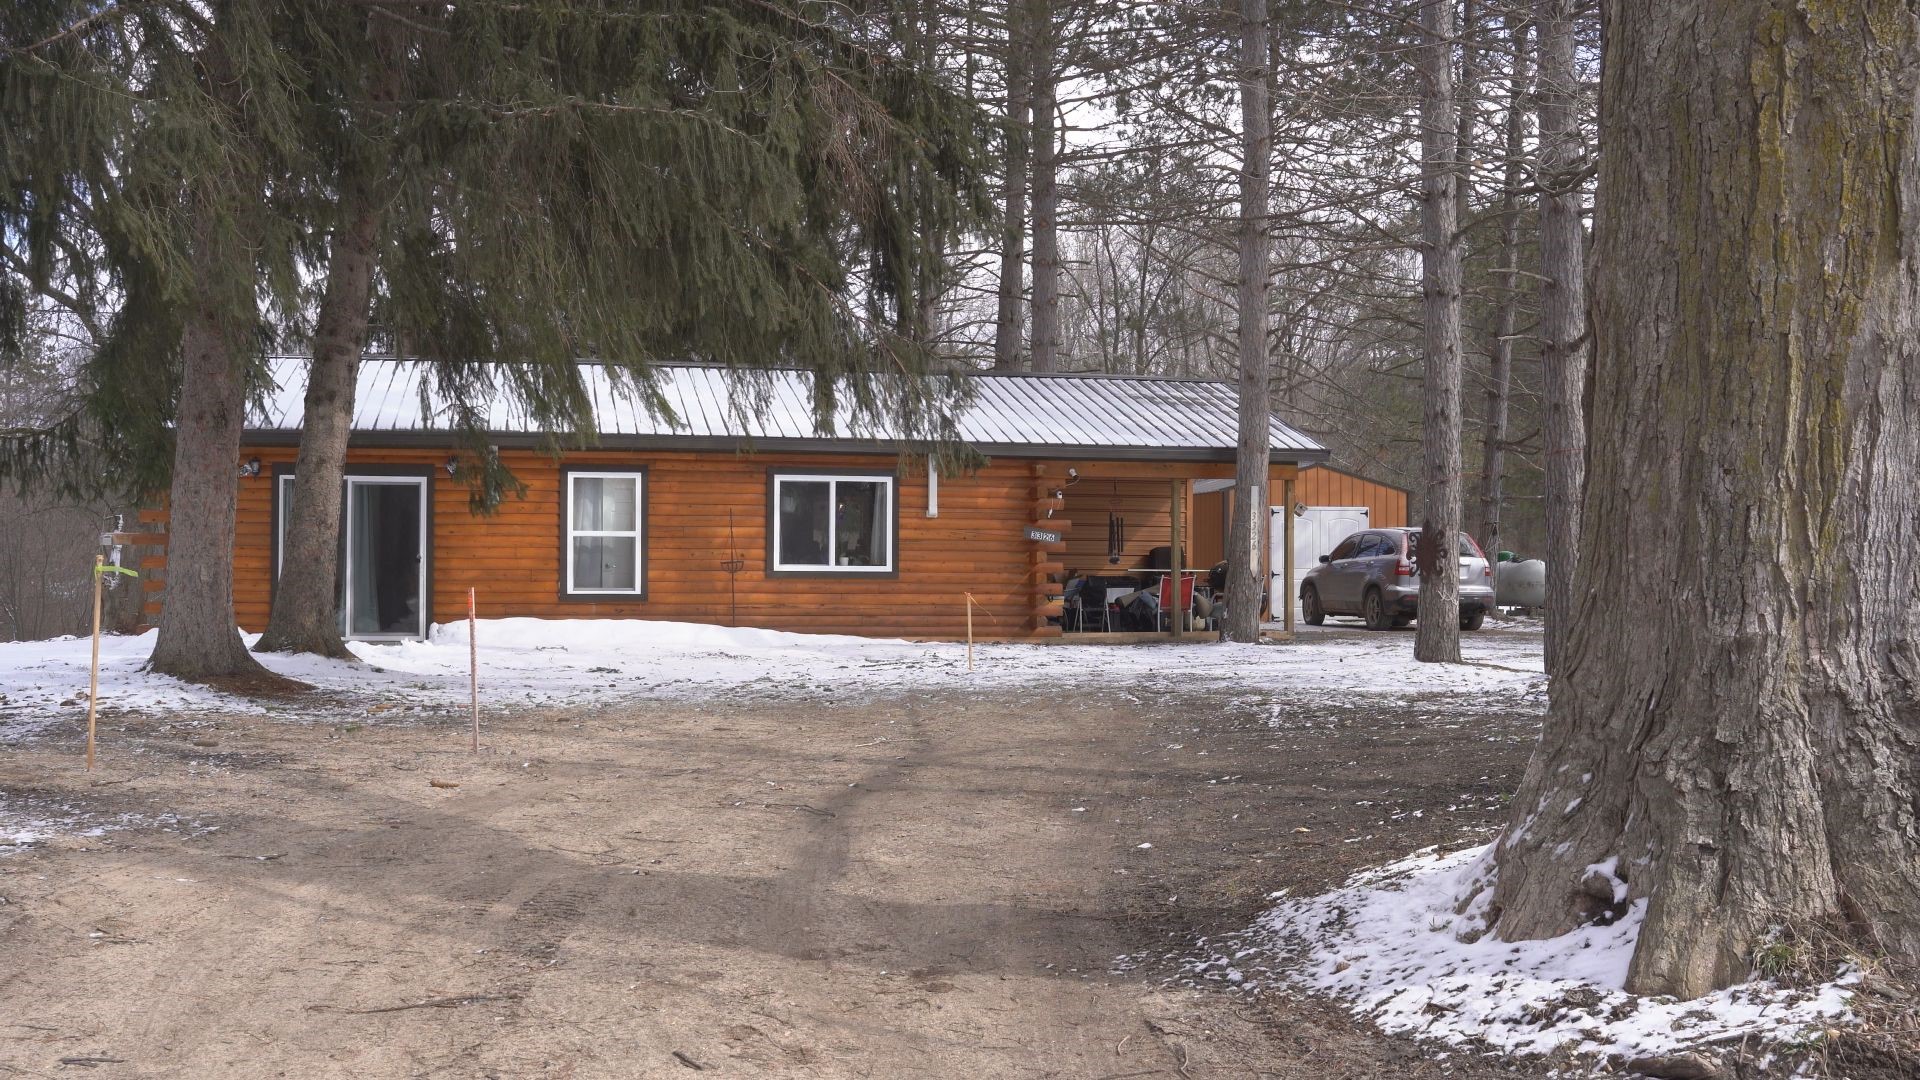 They completed the home about two months after breaking ground, and Joseph Riker was able to spend winter in his very own log cabin.